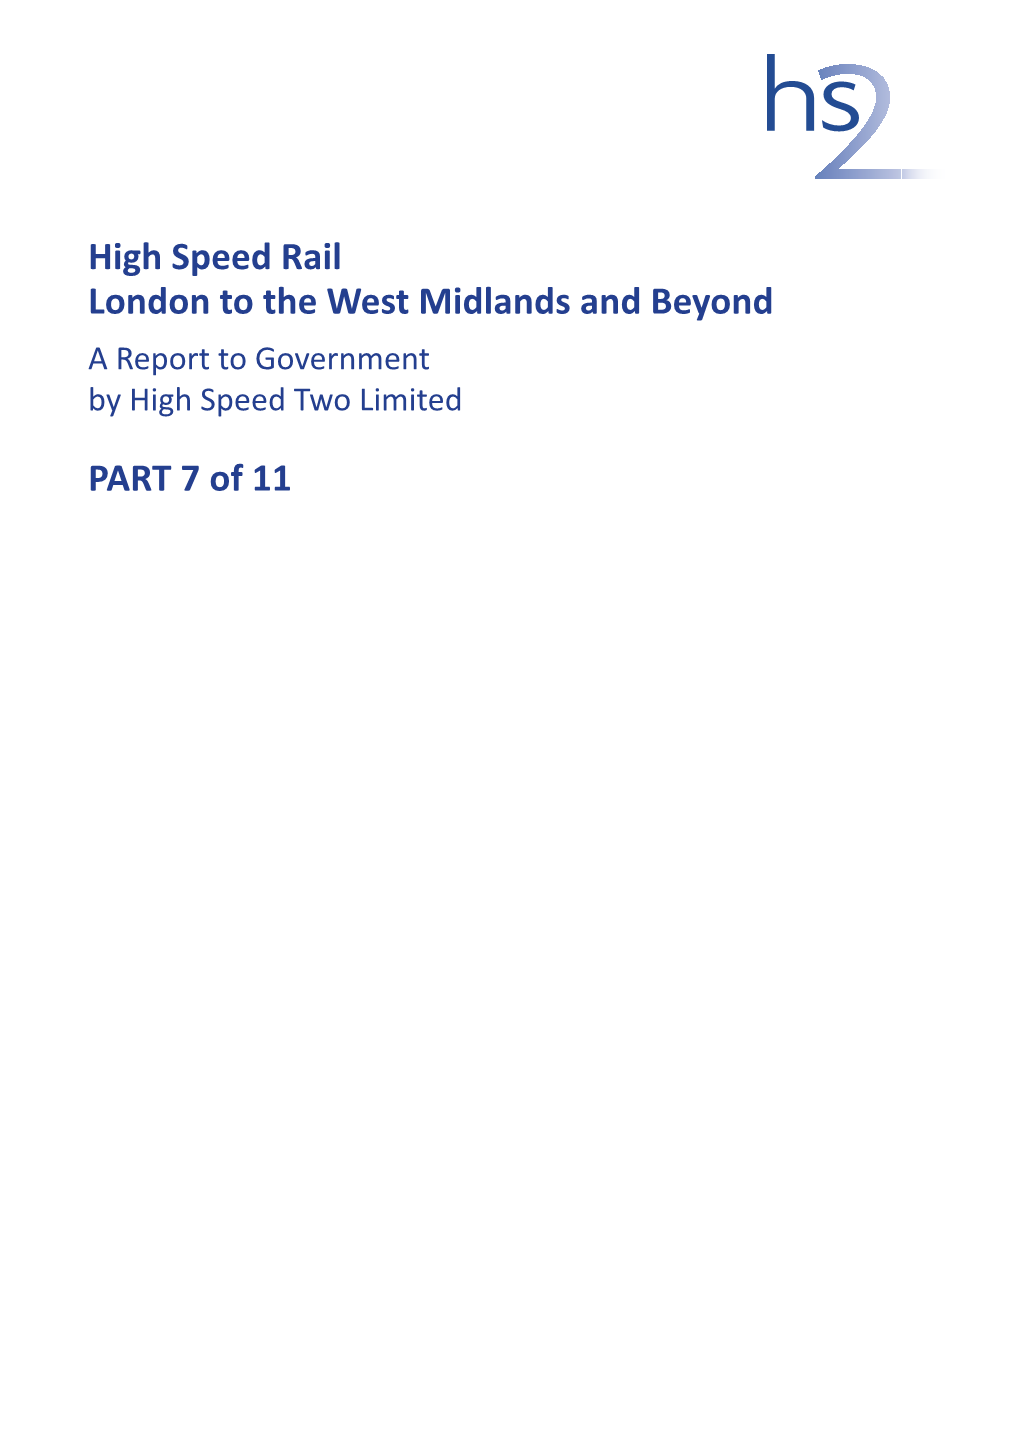 High Speed Rail London to the West Midlands and Beyond a Report to Government by High Speed Two Limited